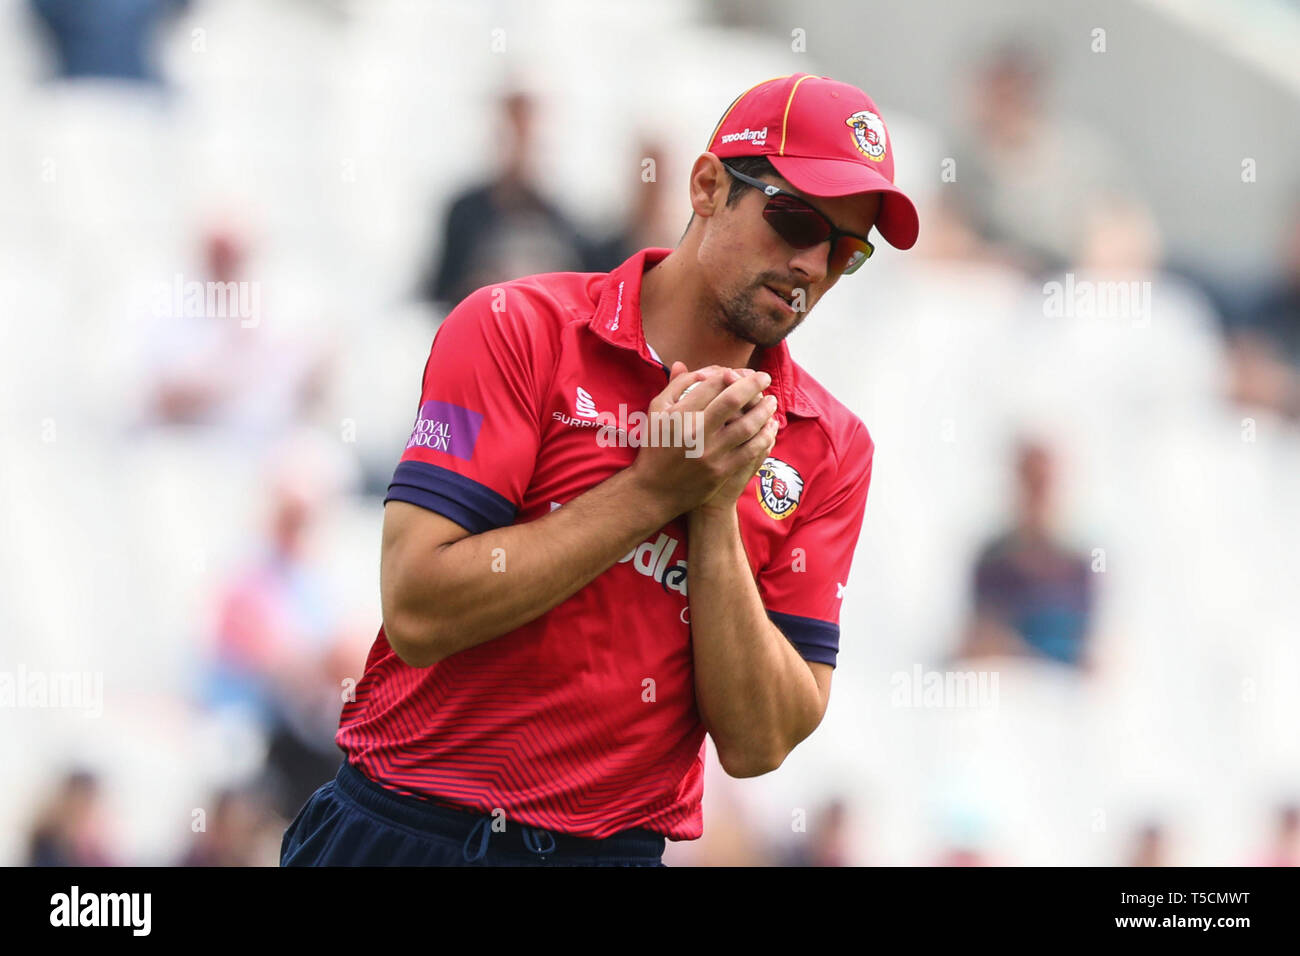 LONDON, UK. 23 April 2019: Sir Alastair Cook of Essex catches the ball to dismiss Will Jacks of Surrey (Not Pictured) during the Surrey v Essex, Royal London One Day Cup match at The Kia Oval. Credit: Mitchell Gunn/ESPA-Images Stock Photo